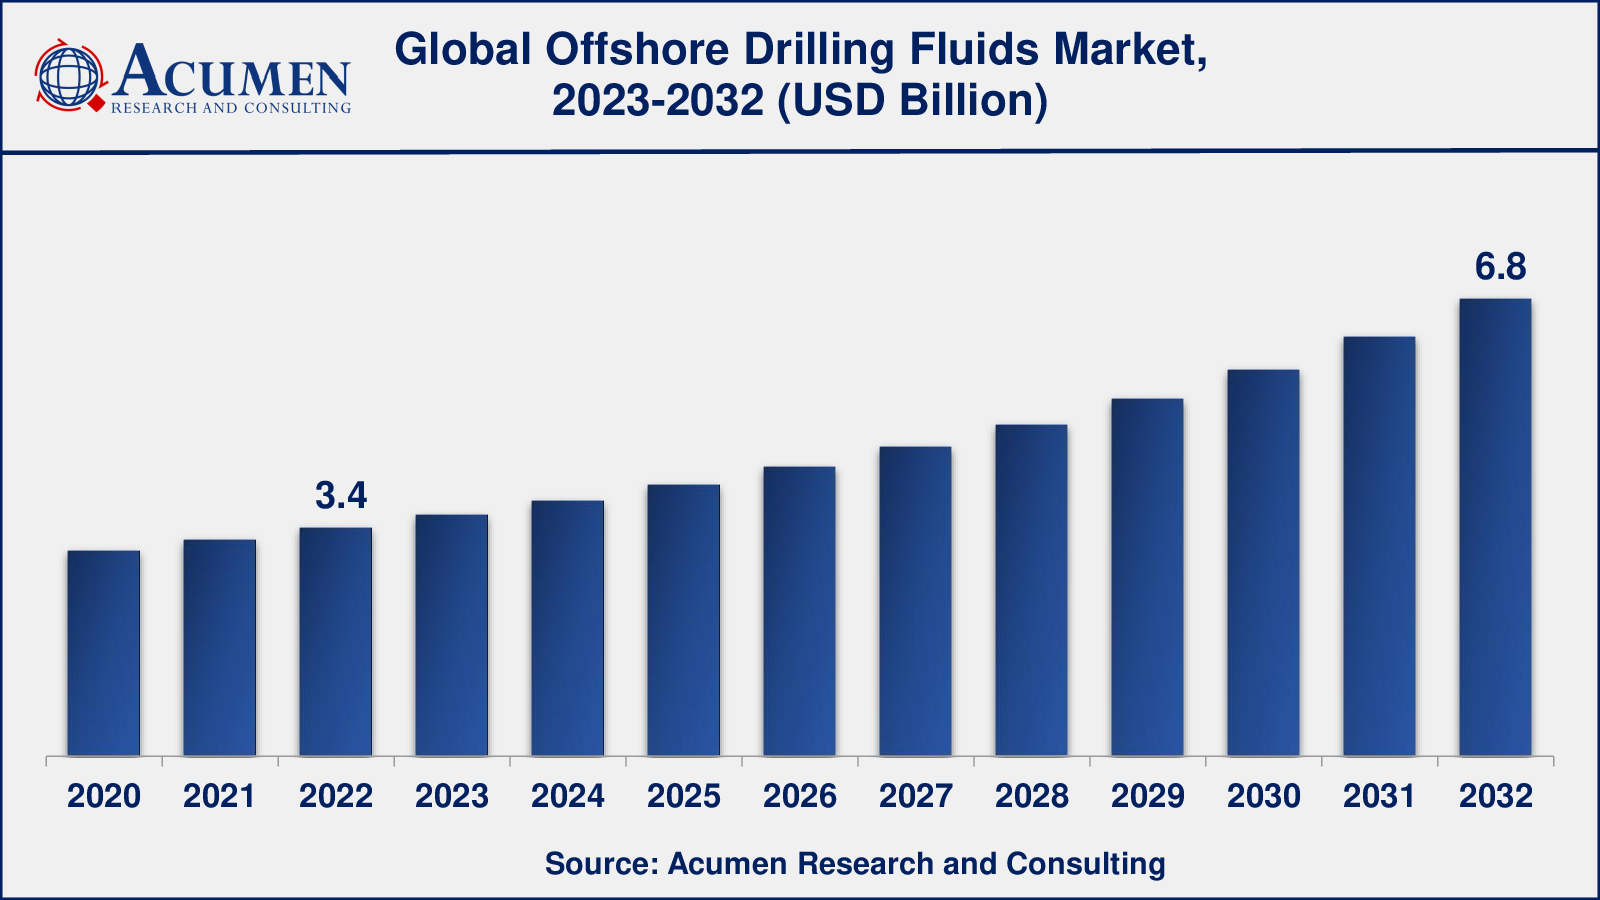 Offshore Drilling Fluids Market Analysis Period